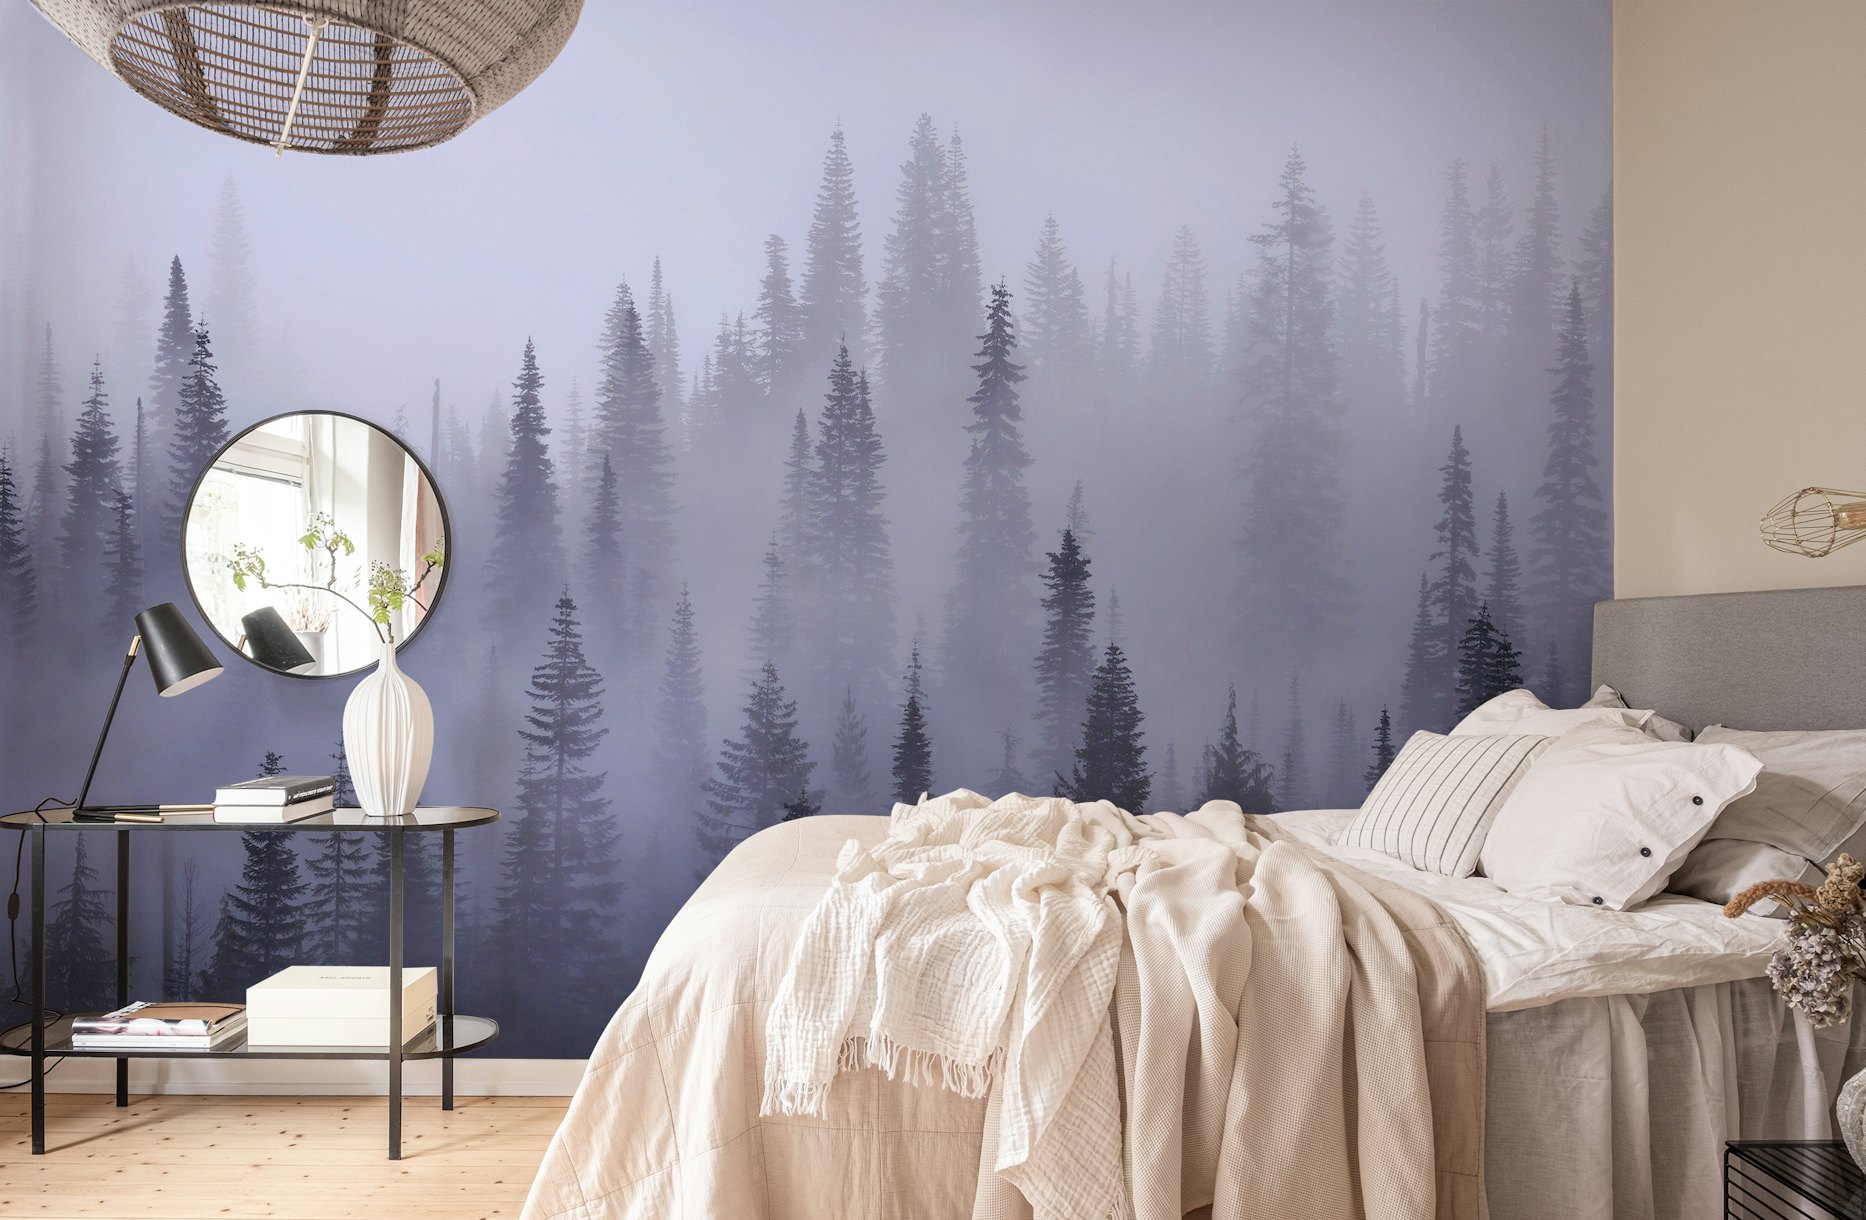 Misty forest wallpaper featuring tall, misty trees and serene atmosphere